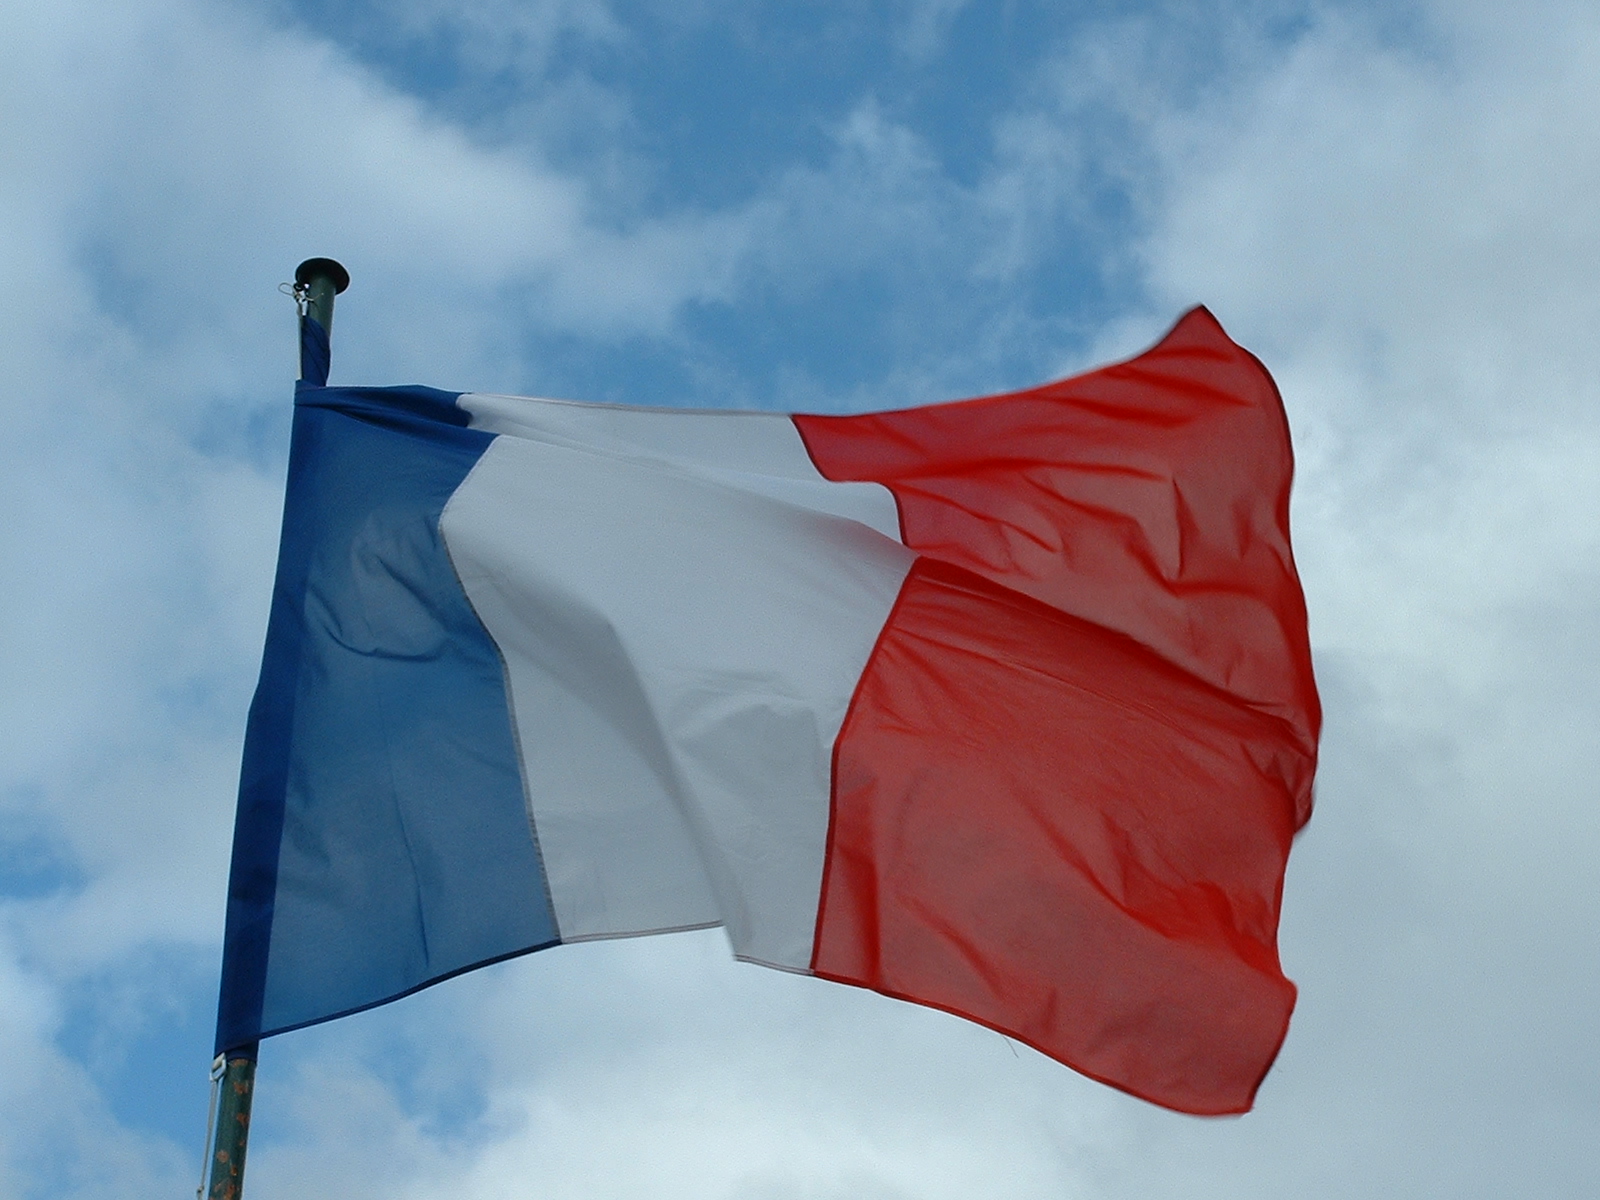 the flag of france is flying in a blue, white and red sky